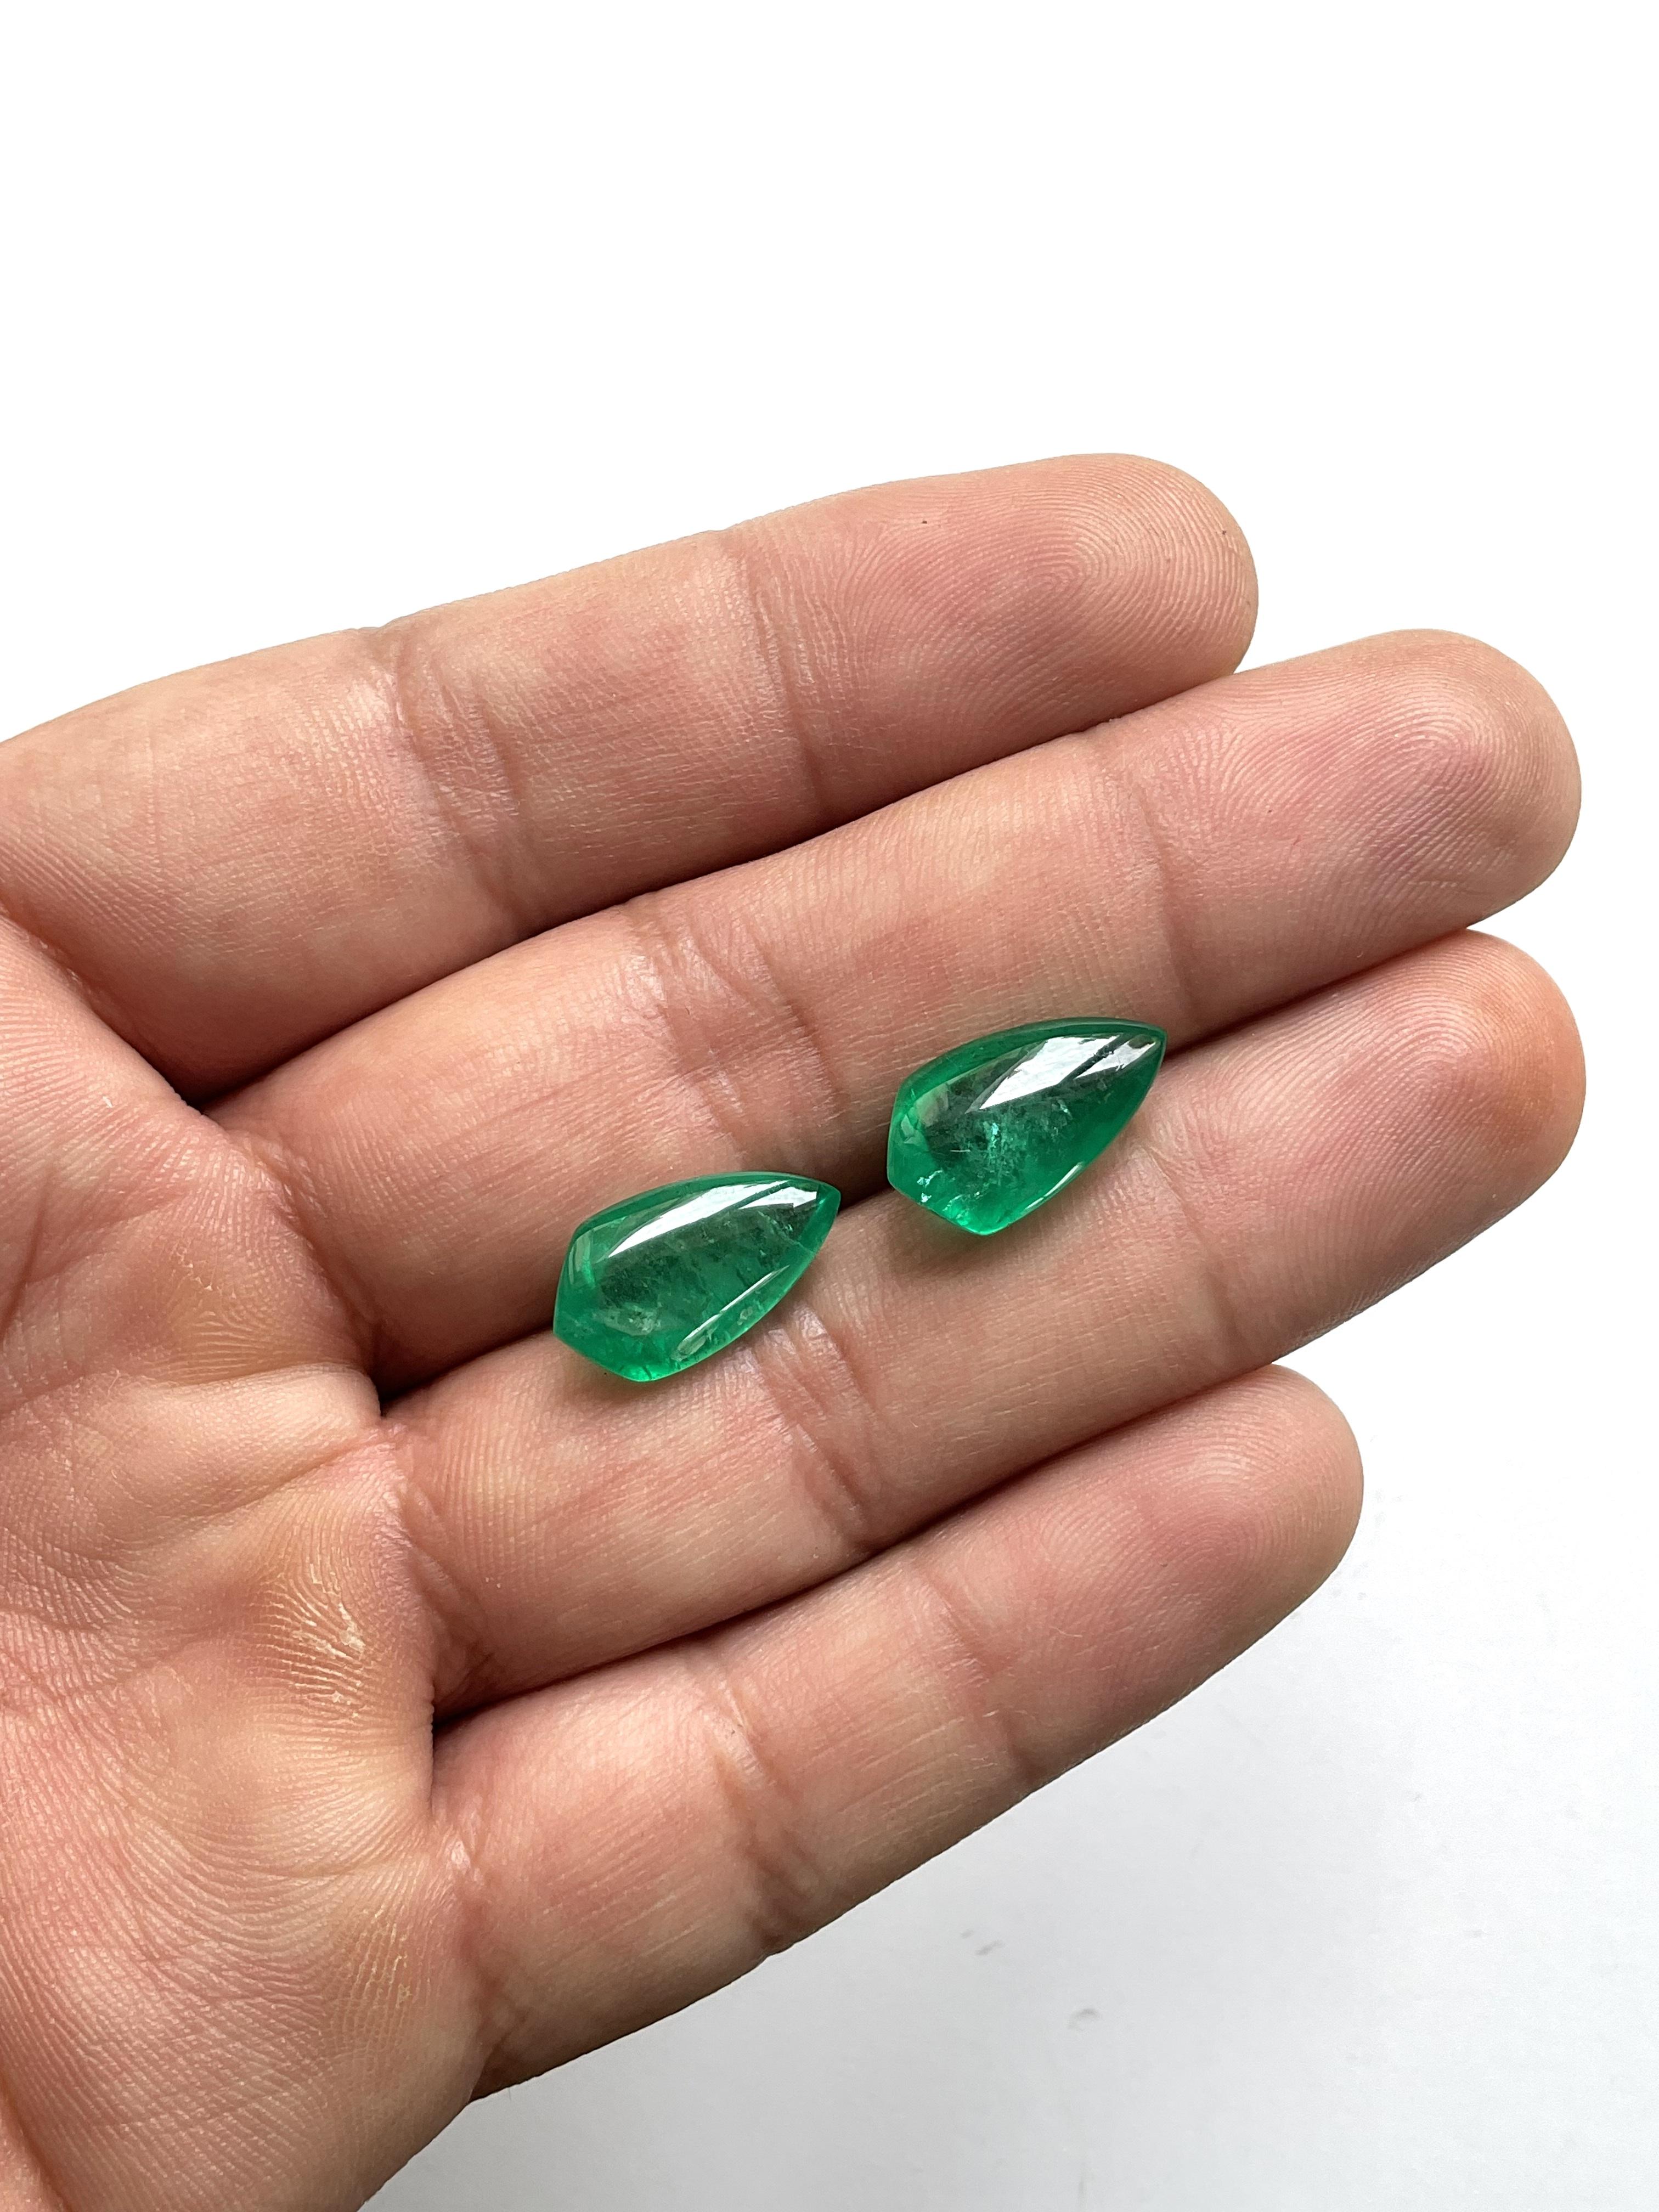 Shield Cut 11.50 Carats Zambian Emerald Shield Pair Top Quality For Earrings Natural Gem For Sale